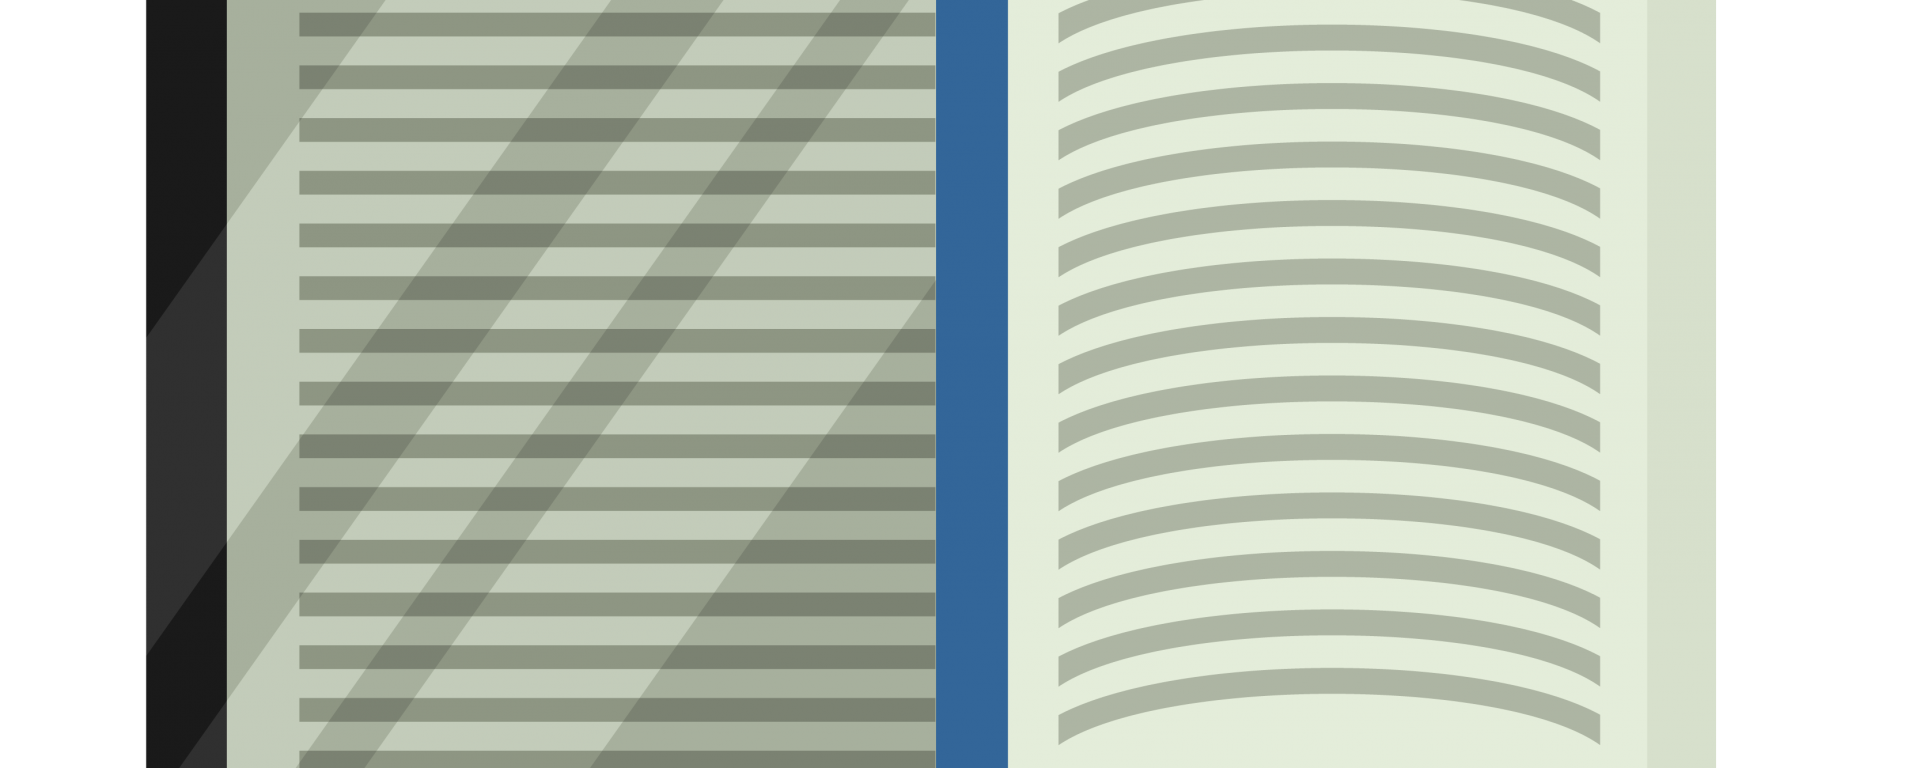 An ebook icon that shows an ebook reader on the left with a bookmark in the middle and a page opening up to the right.